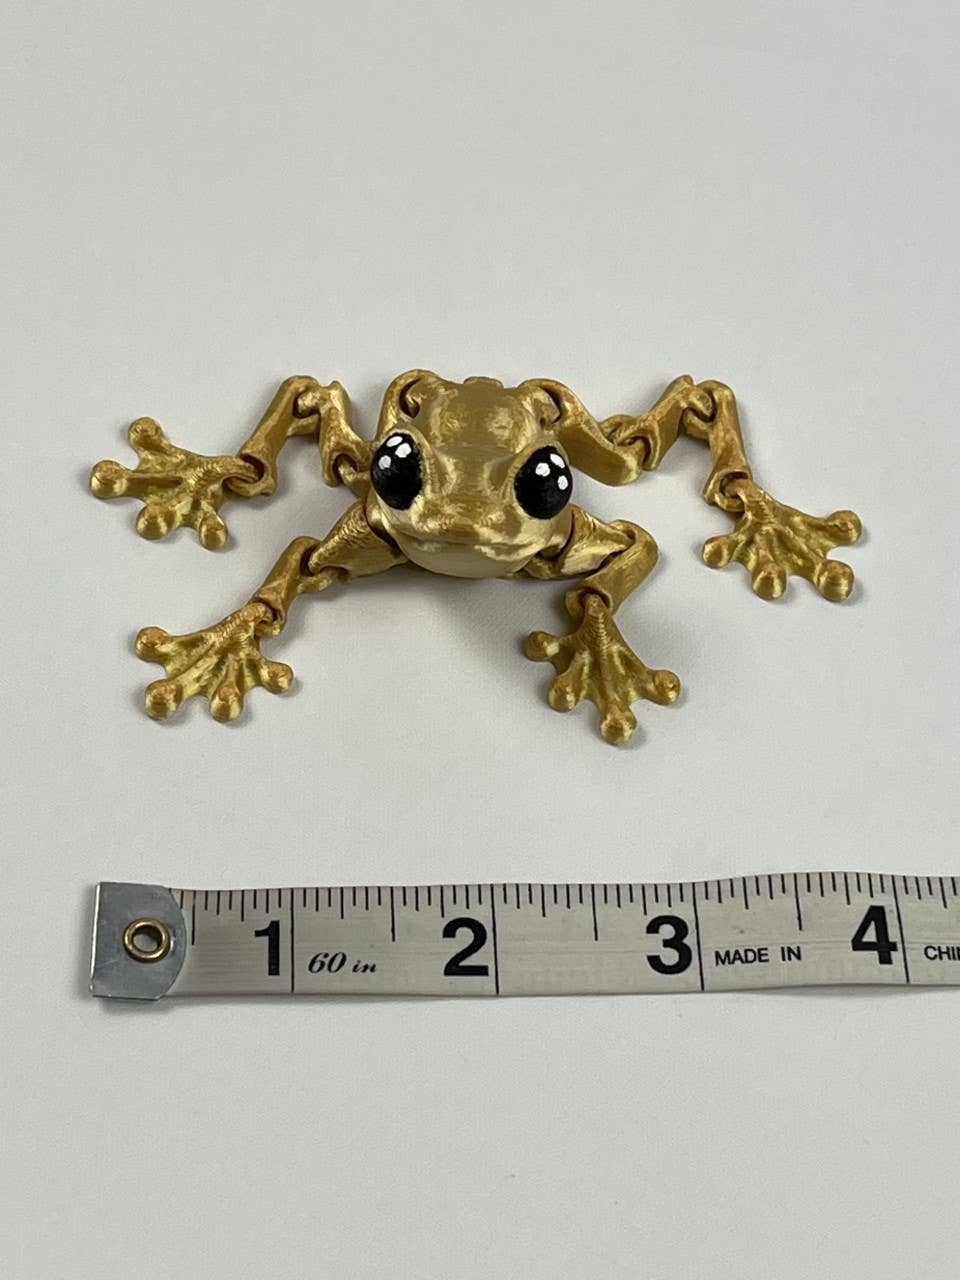 3D Printed Frogs